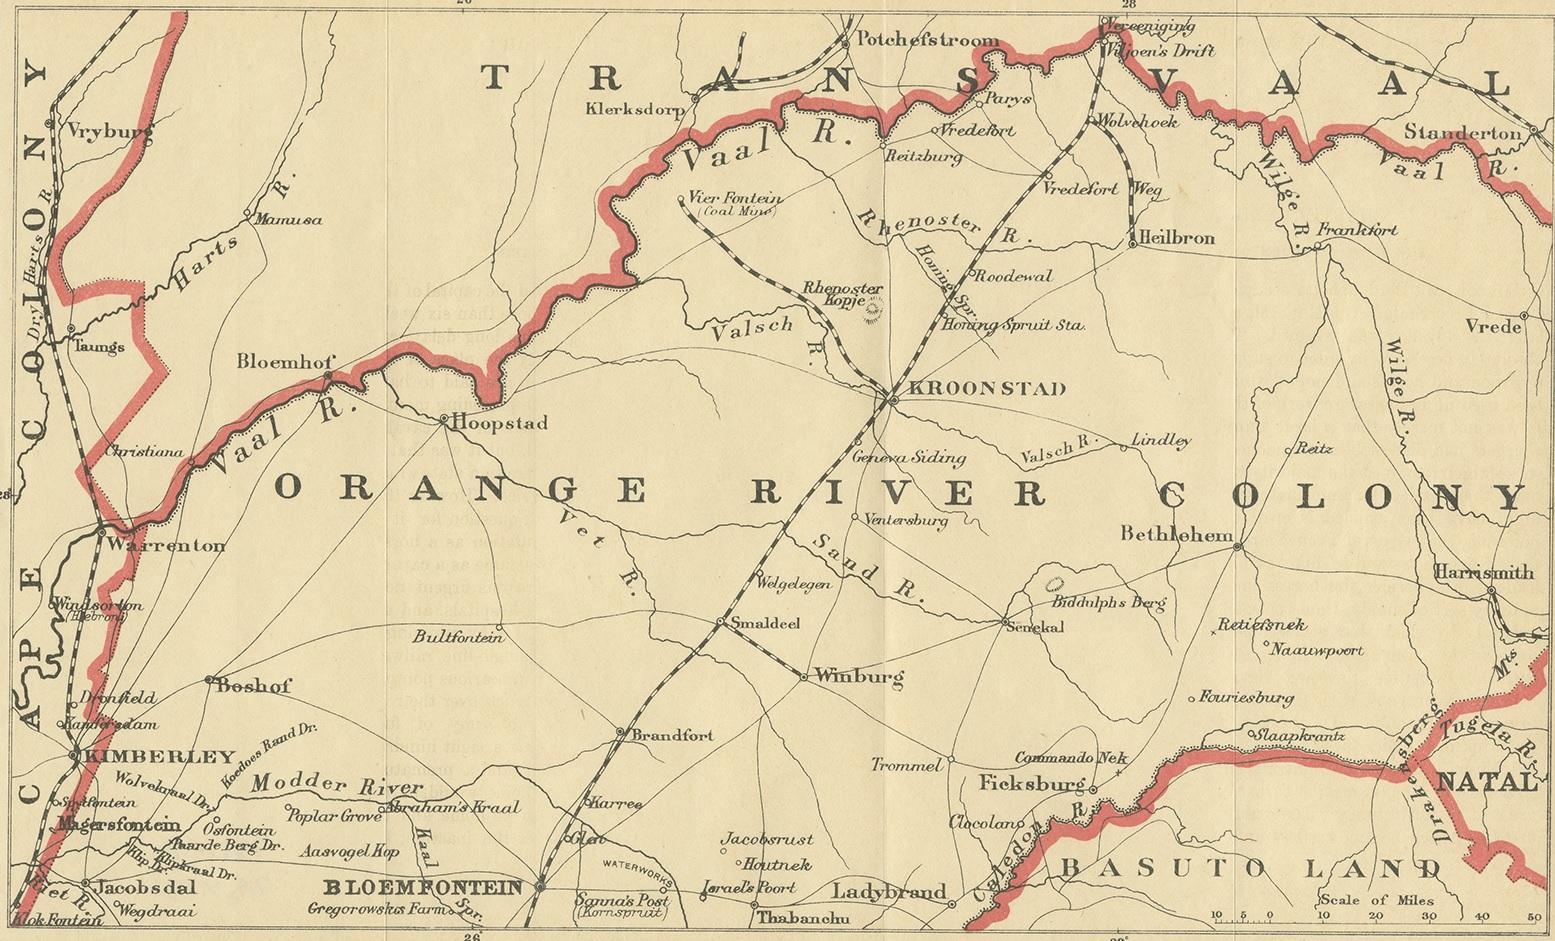 Antique map titled 'Orange River Colony, northern part'. Lithograph of the northern part of the Orange River Colony, Africa. The Orange River Colony was the British colony created after Britain first occupied (1900) and then annexed (1902) the